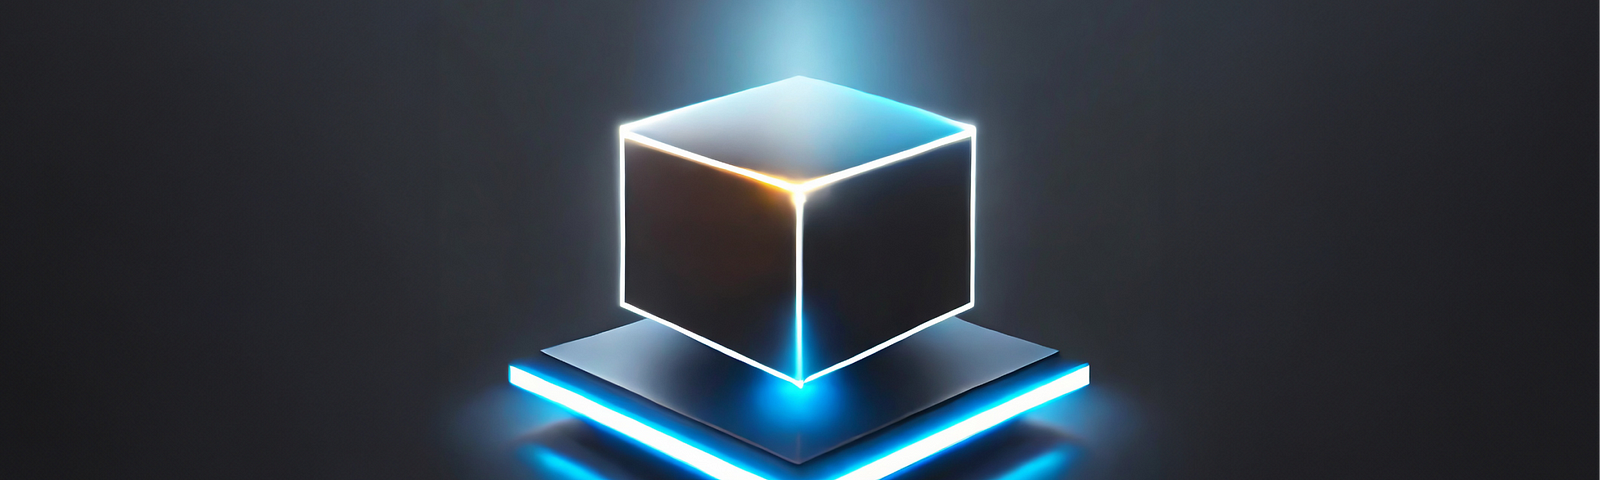 Highlighted on the boarders cube in 3D — floating in the space above the highlighted on the boarders flat square plate. Which stands for 3D Product Transformation.